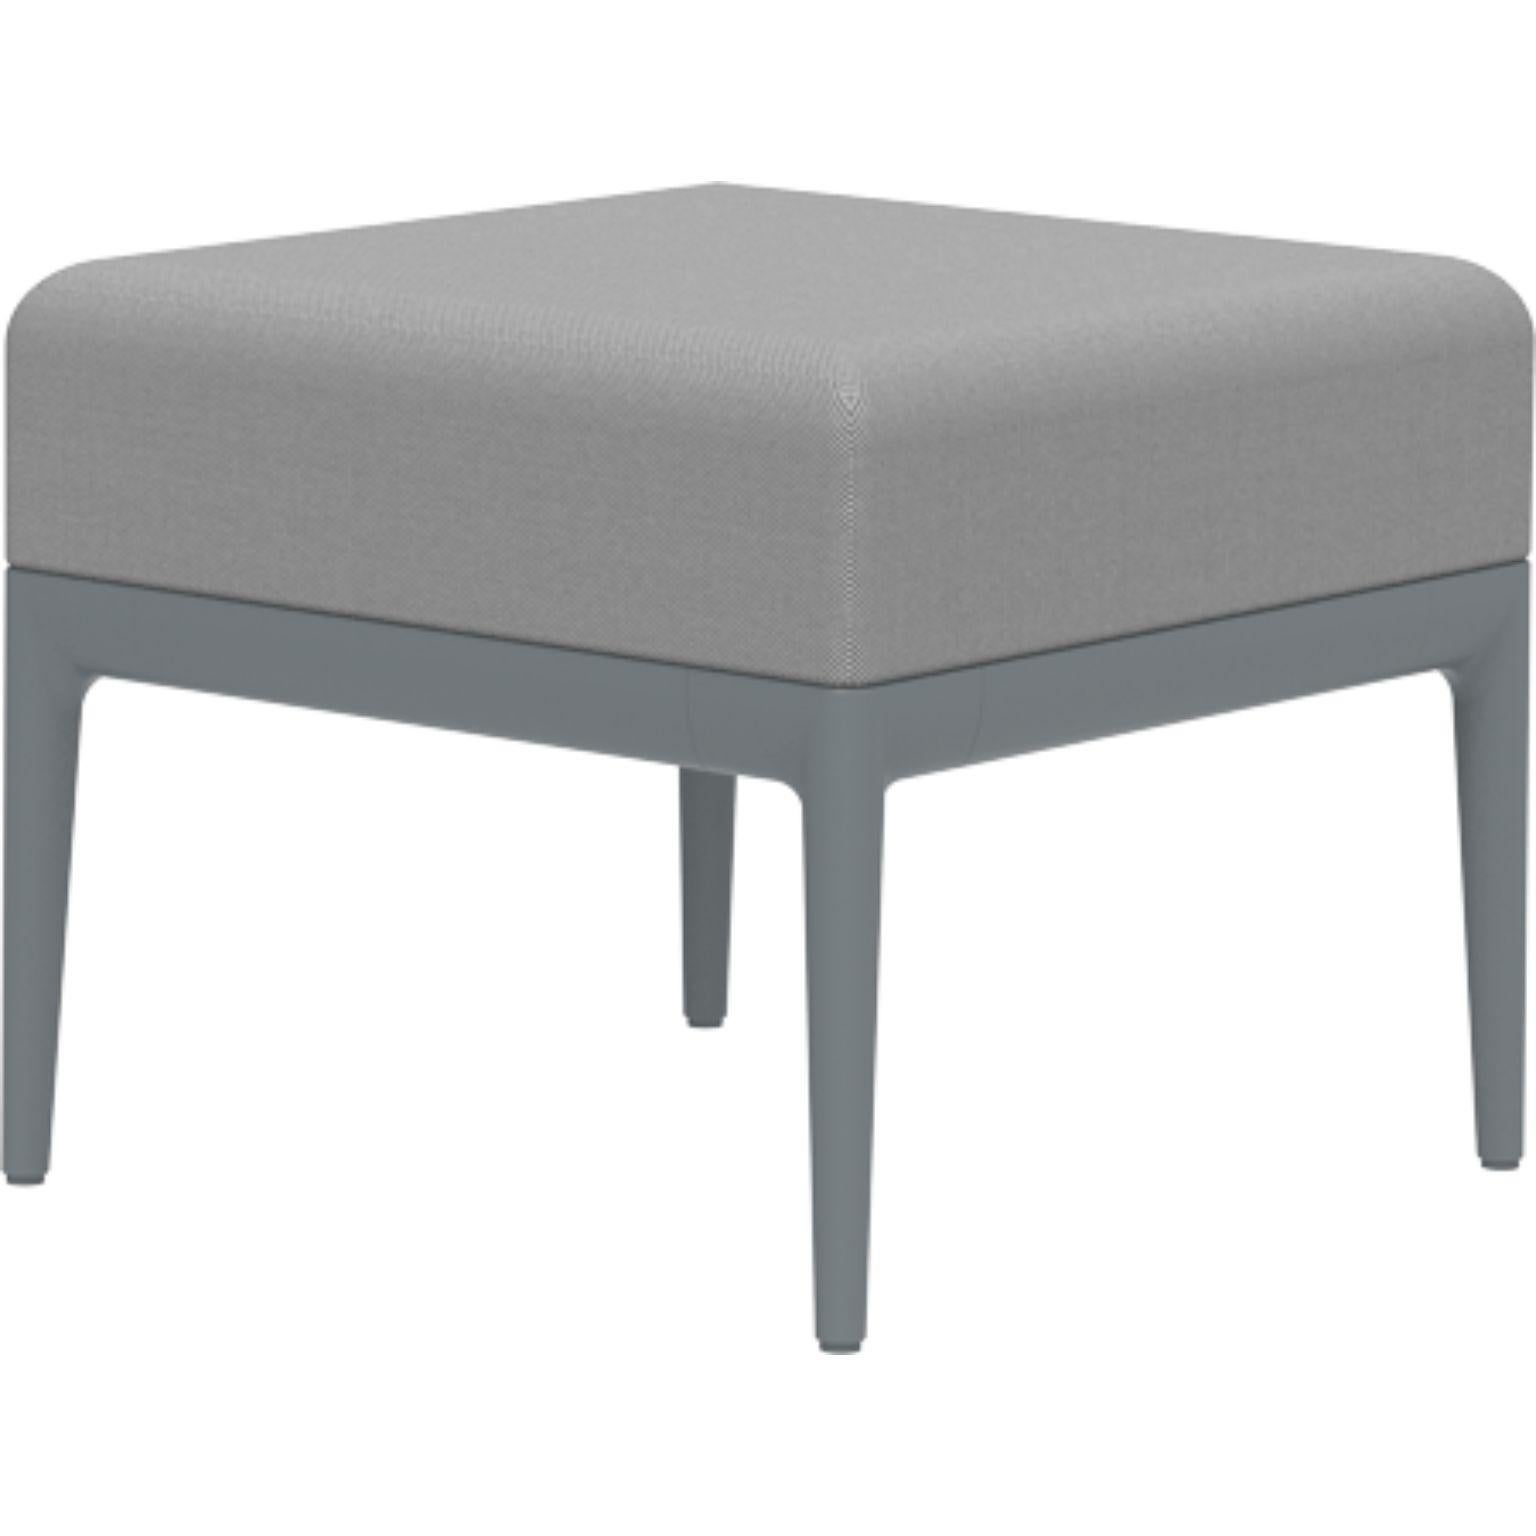 Ribbons Grey Puff by MOWEE
Dimensions: D50 x W50 x H42 cm.
Material: Aluminum and upholstery.
Weight: 9.3 kg
Also available in different colors and finishes. 

An unmistakable collection for its beauty and robustness. A tribute to the